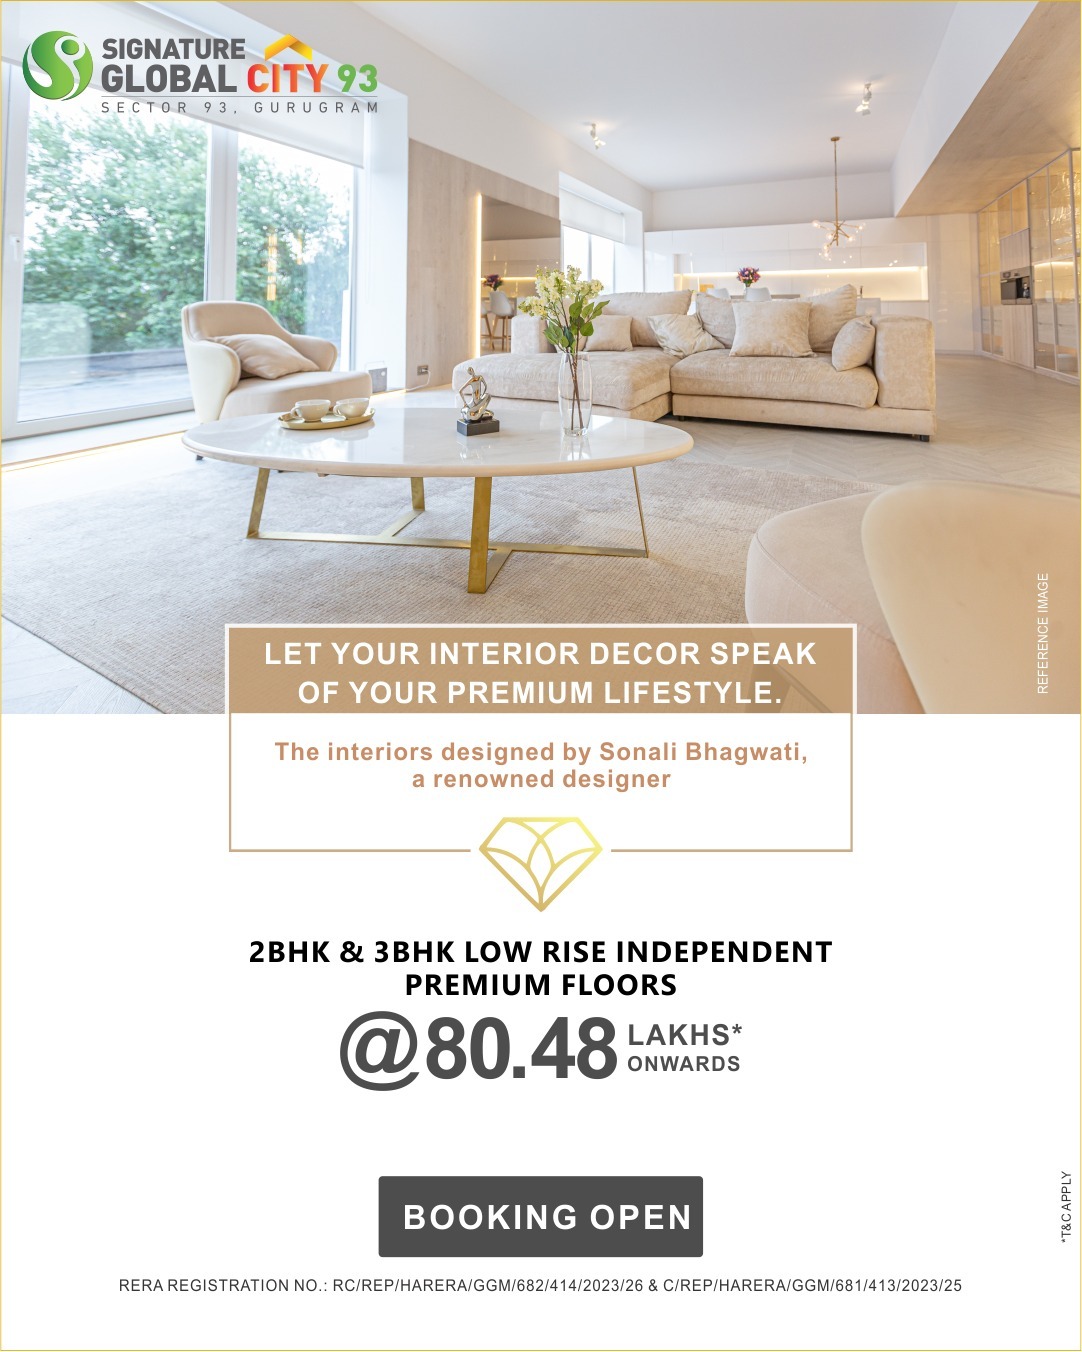 Book your dream home at Signature Global City 93, Sector 93, Gurgaon Update